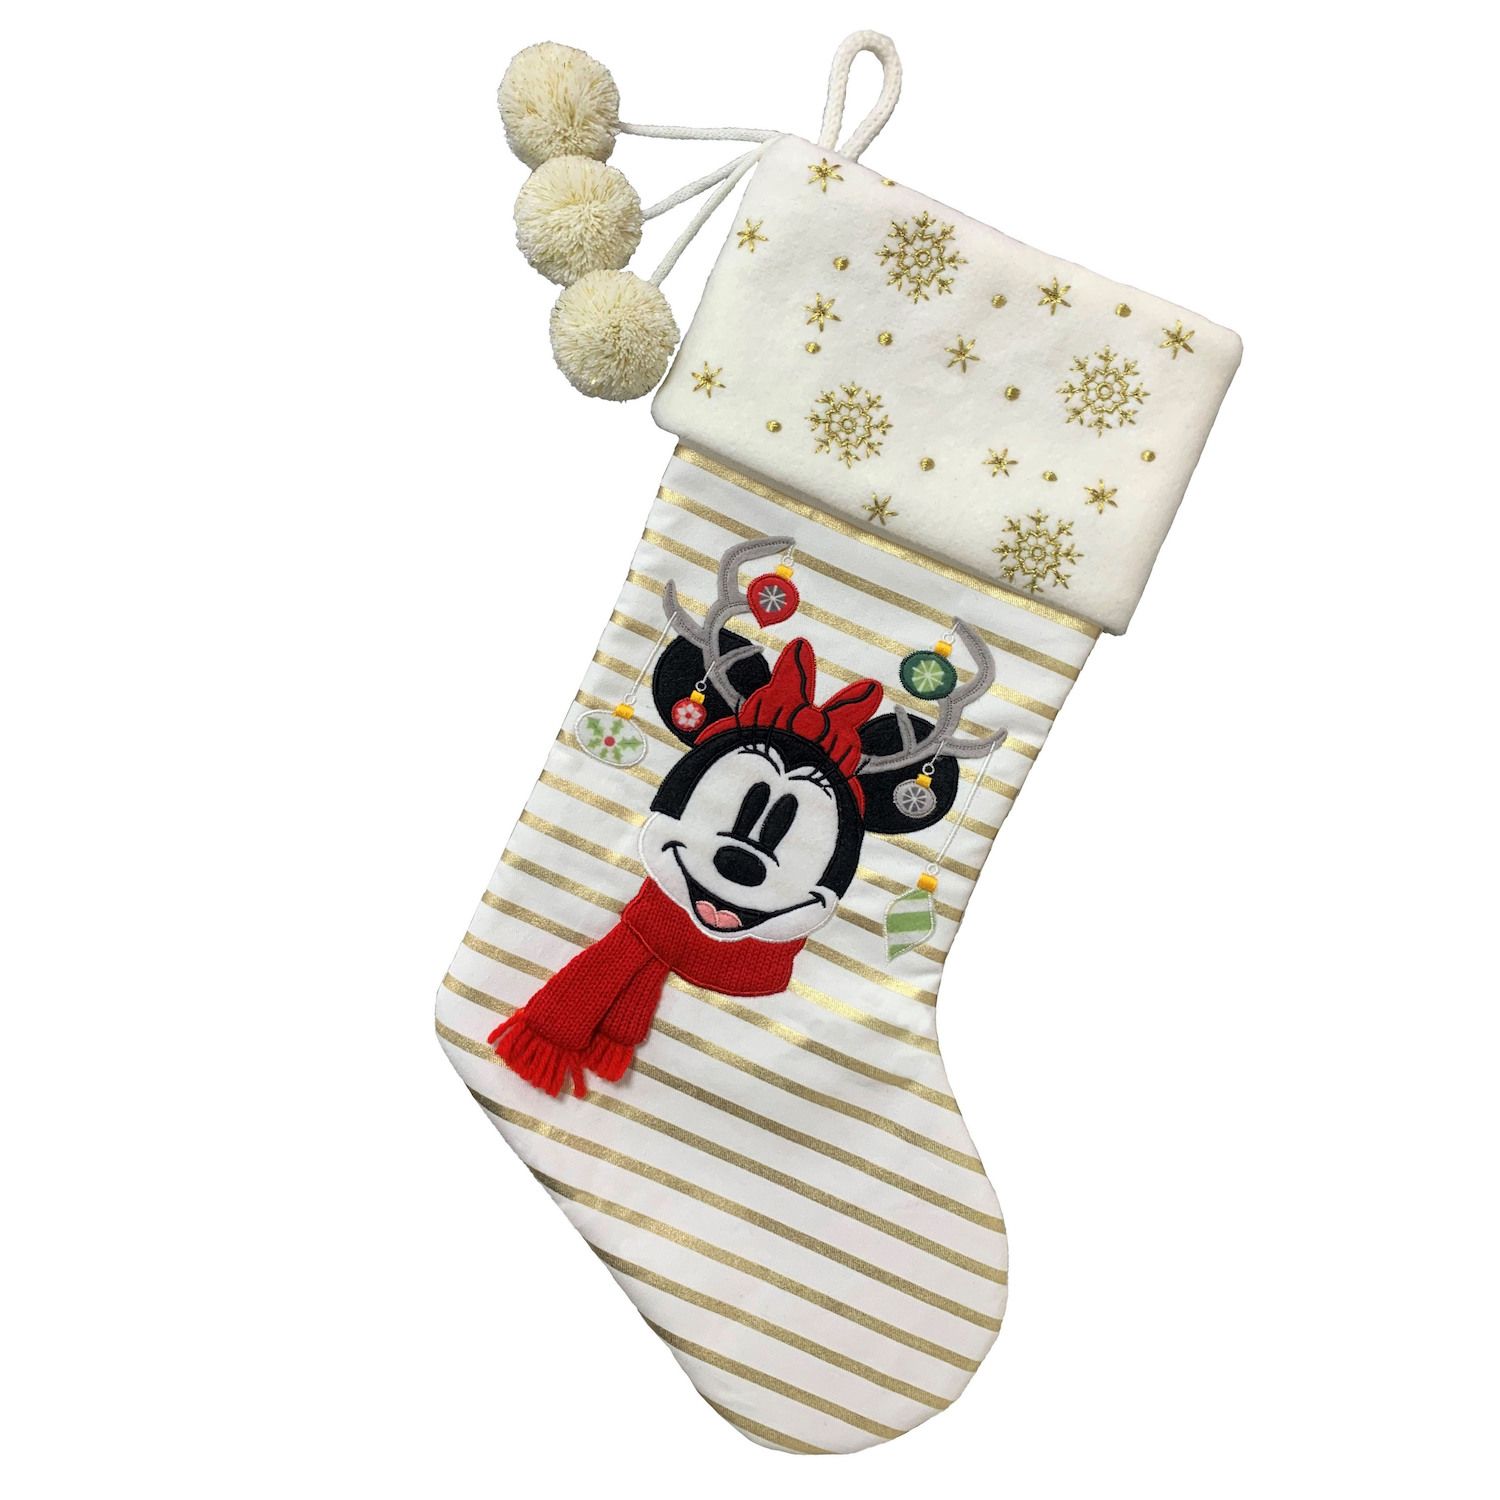 Image for Disney Minnie Mouse Antler Christmas Stocking by St. Nicholas Square® at Kohl's.